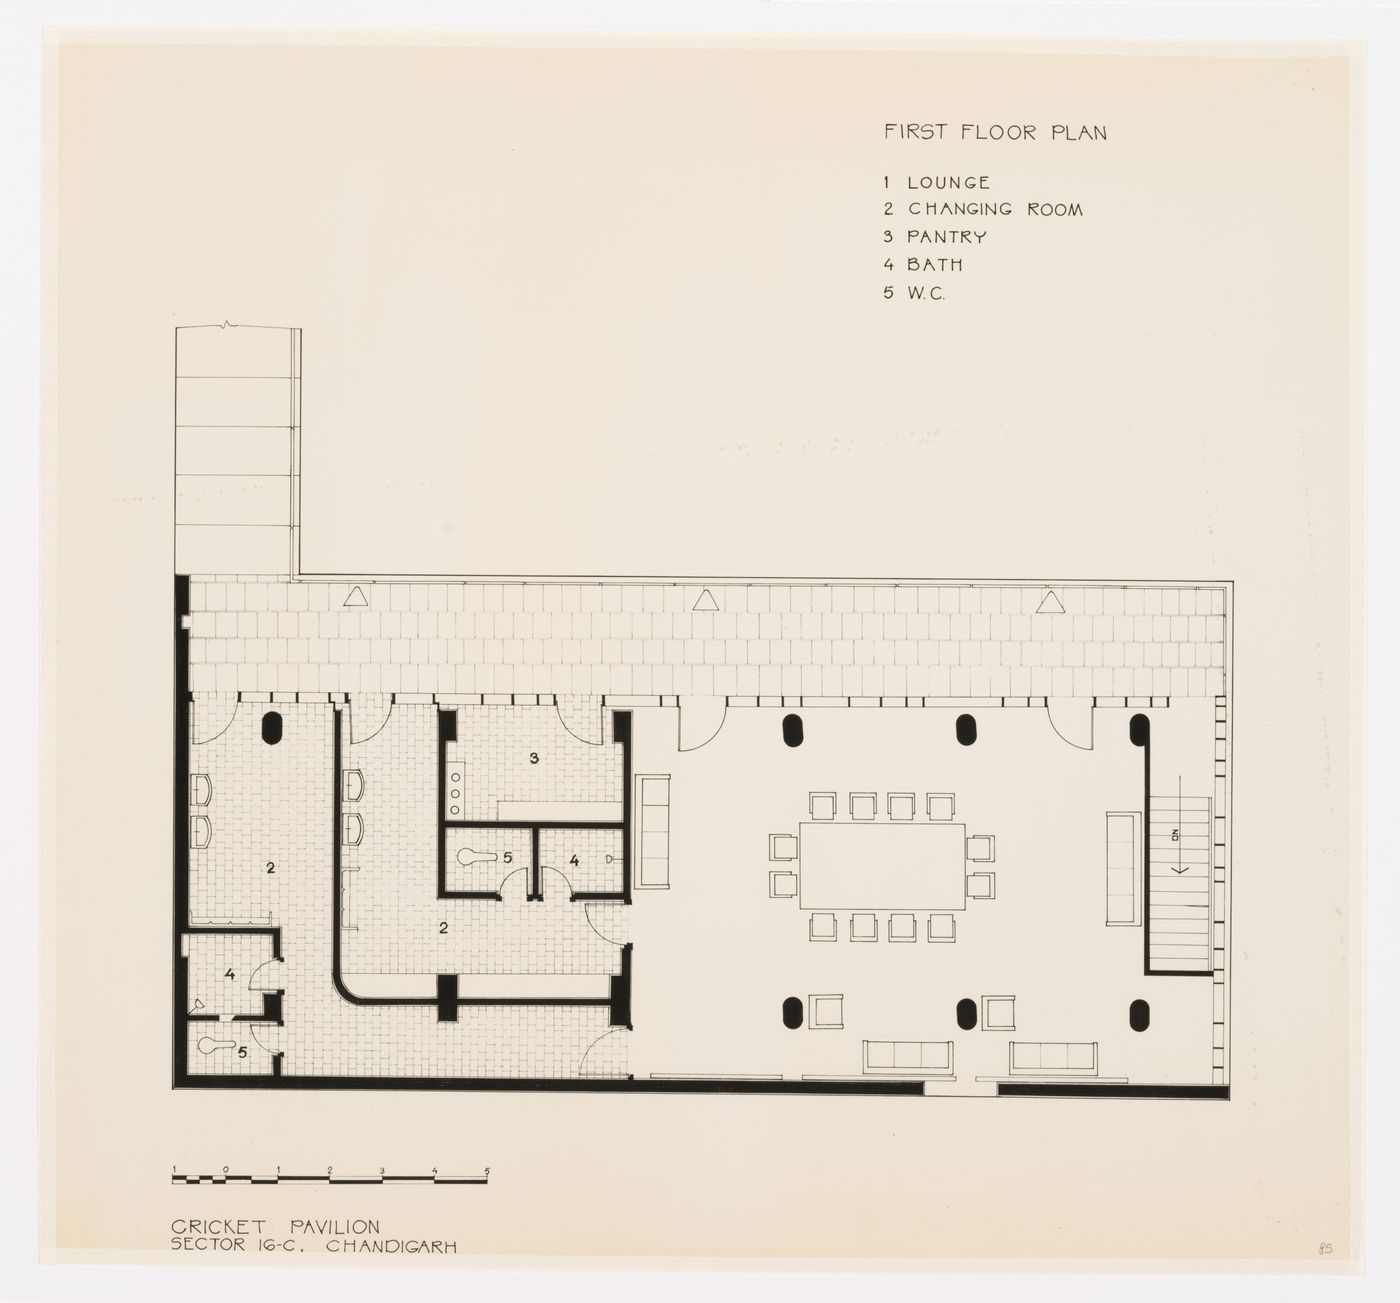 Floor plan for the Cricket Pavilion in sector 16-C in Chandigarh, India